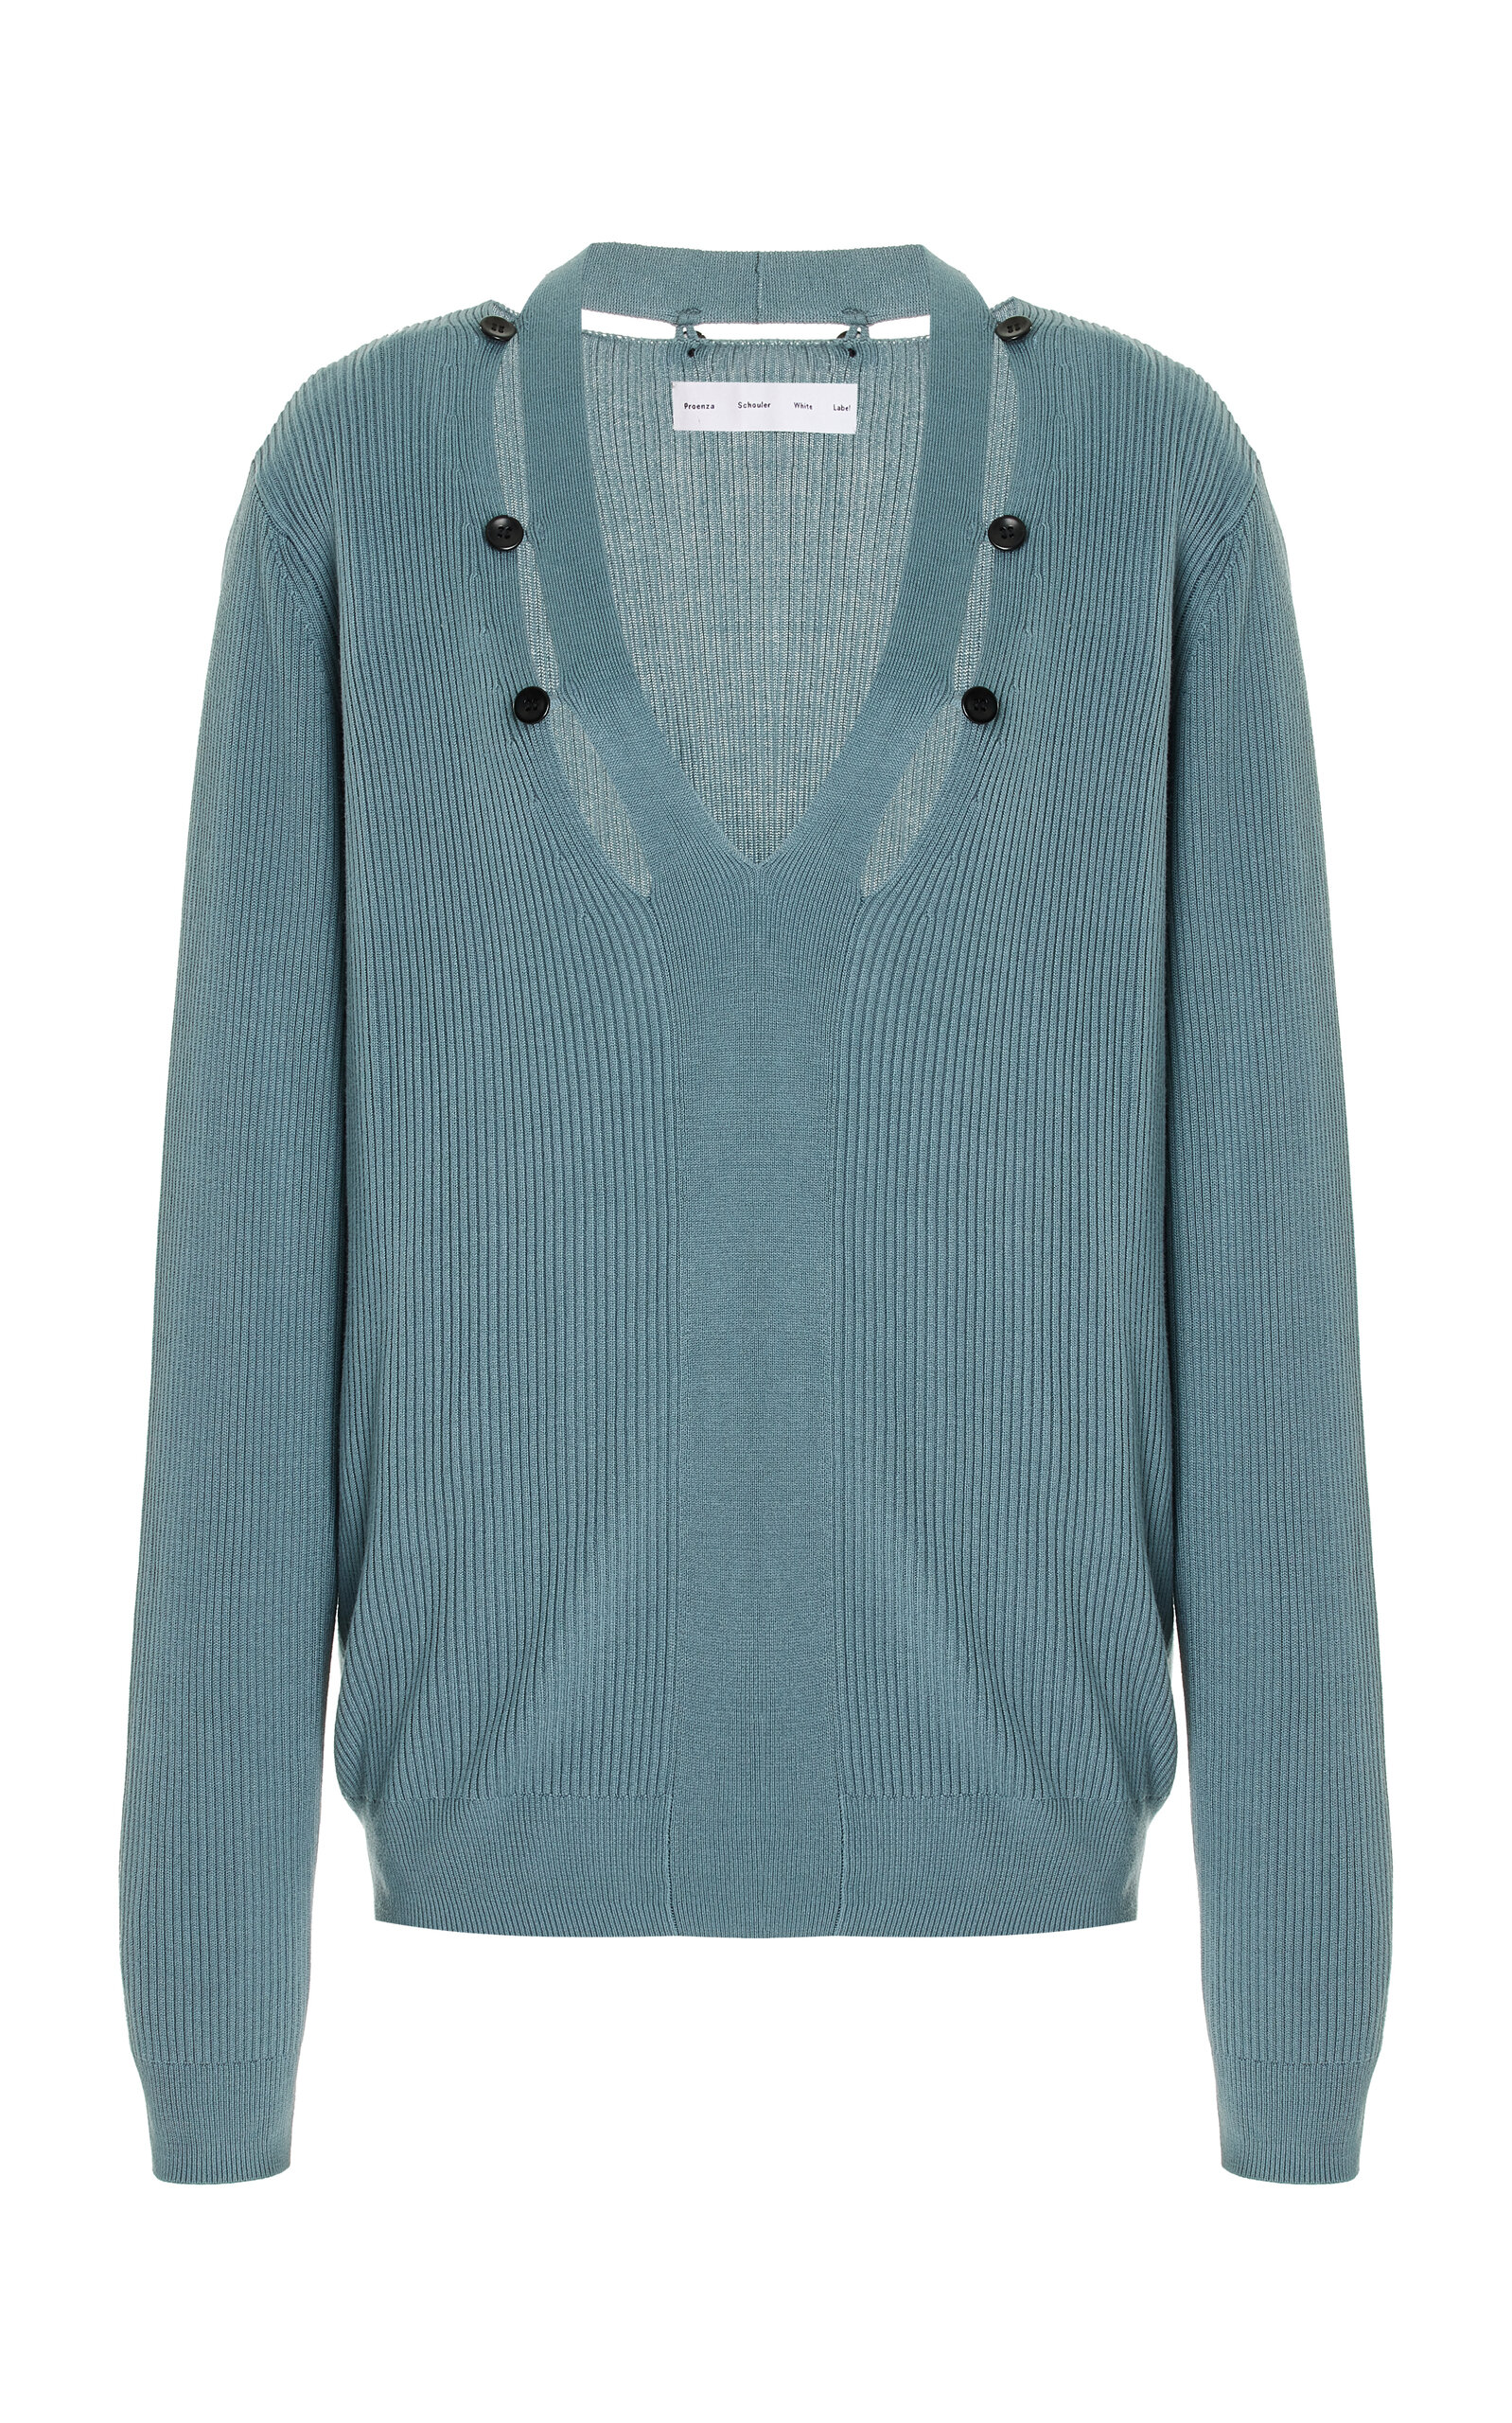 Proenza Schouler White Label Elsie Oversized Button-detailed Knit Sweater In Blue